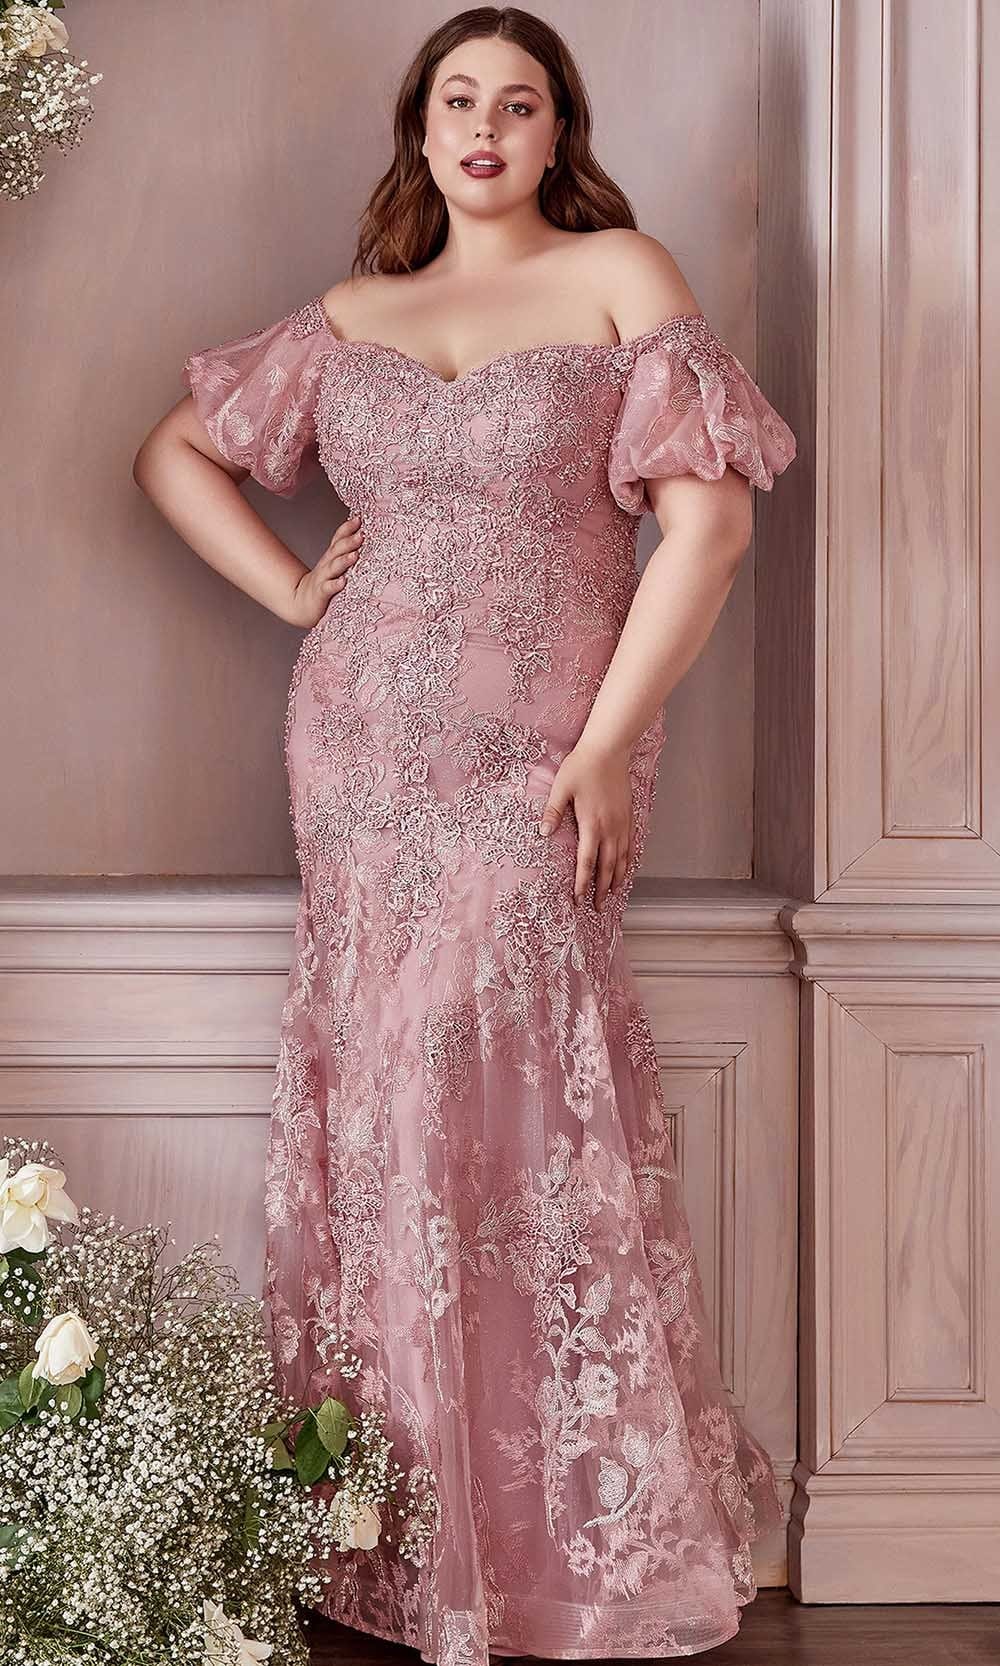 Cinderella Divine CD959C - Embroidered Trumpet Dress Special Occasion Dress 18 / Dusty Rose